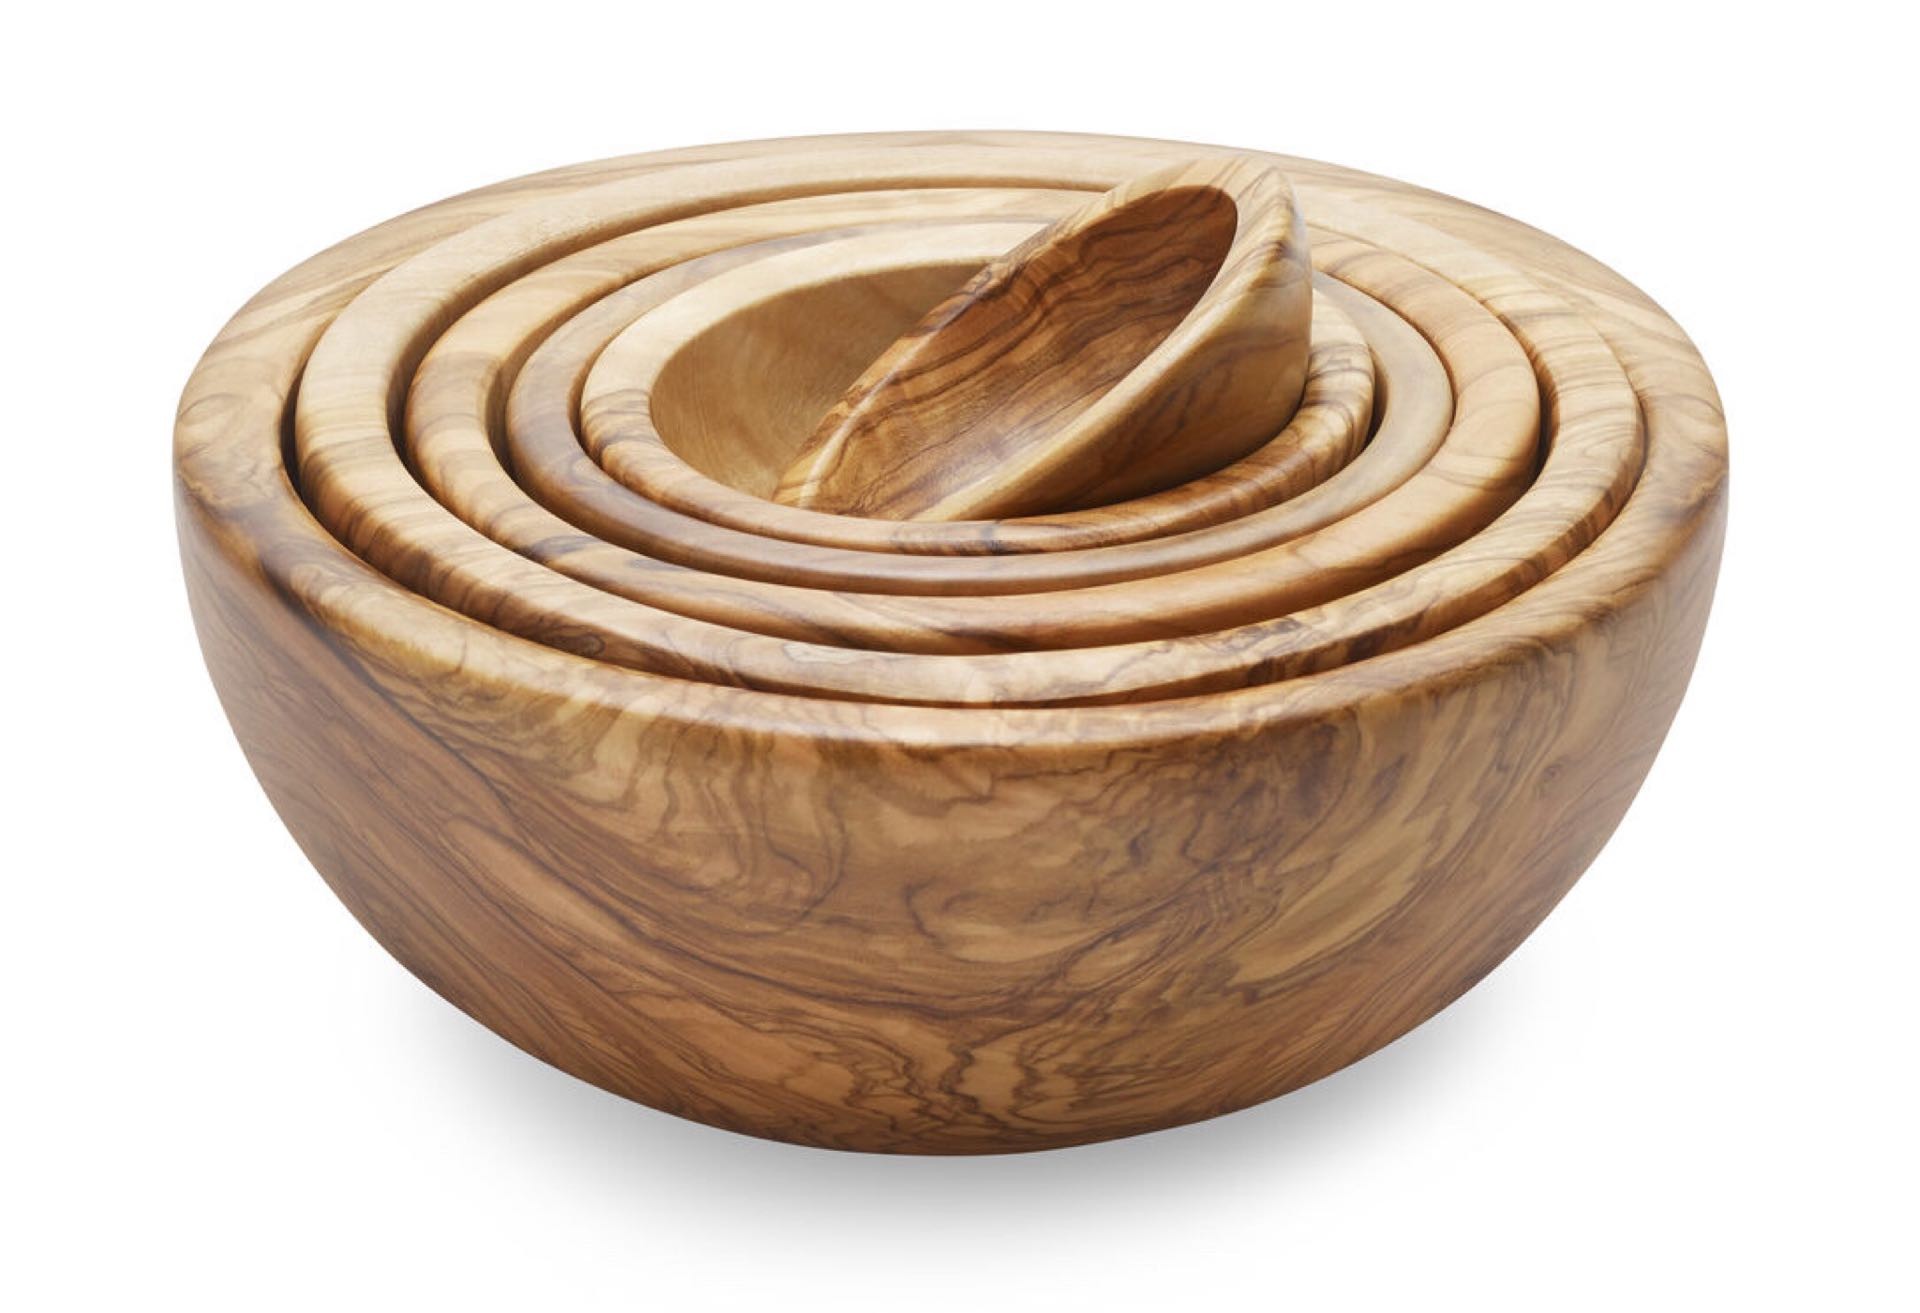 The Museum of Modern Art's olive wood nesting bowls. ($149)